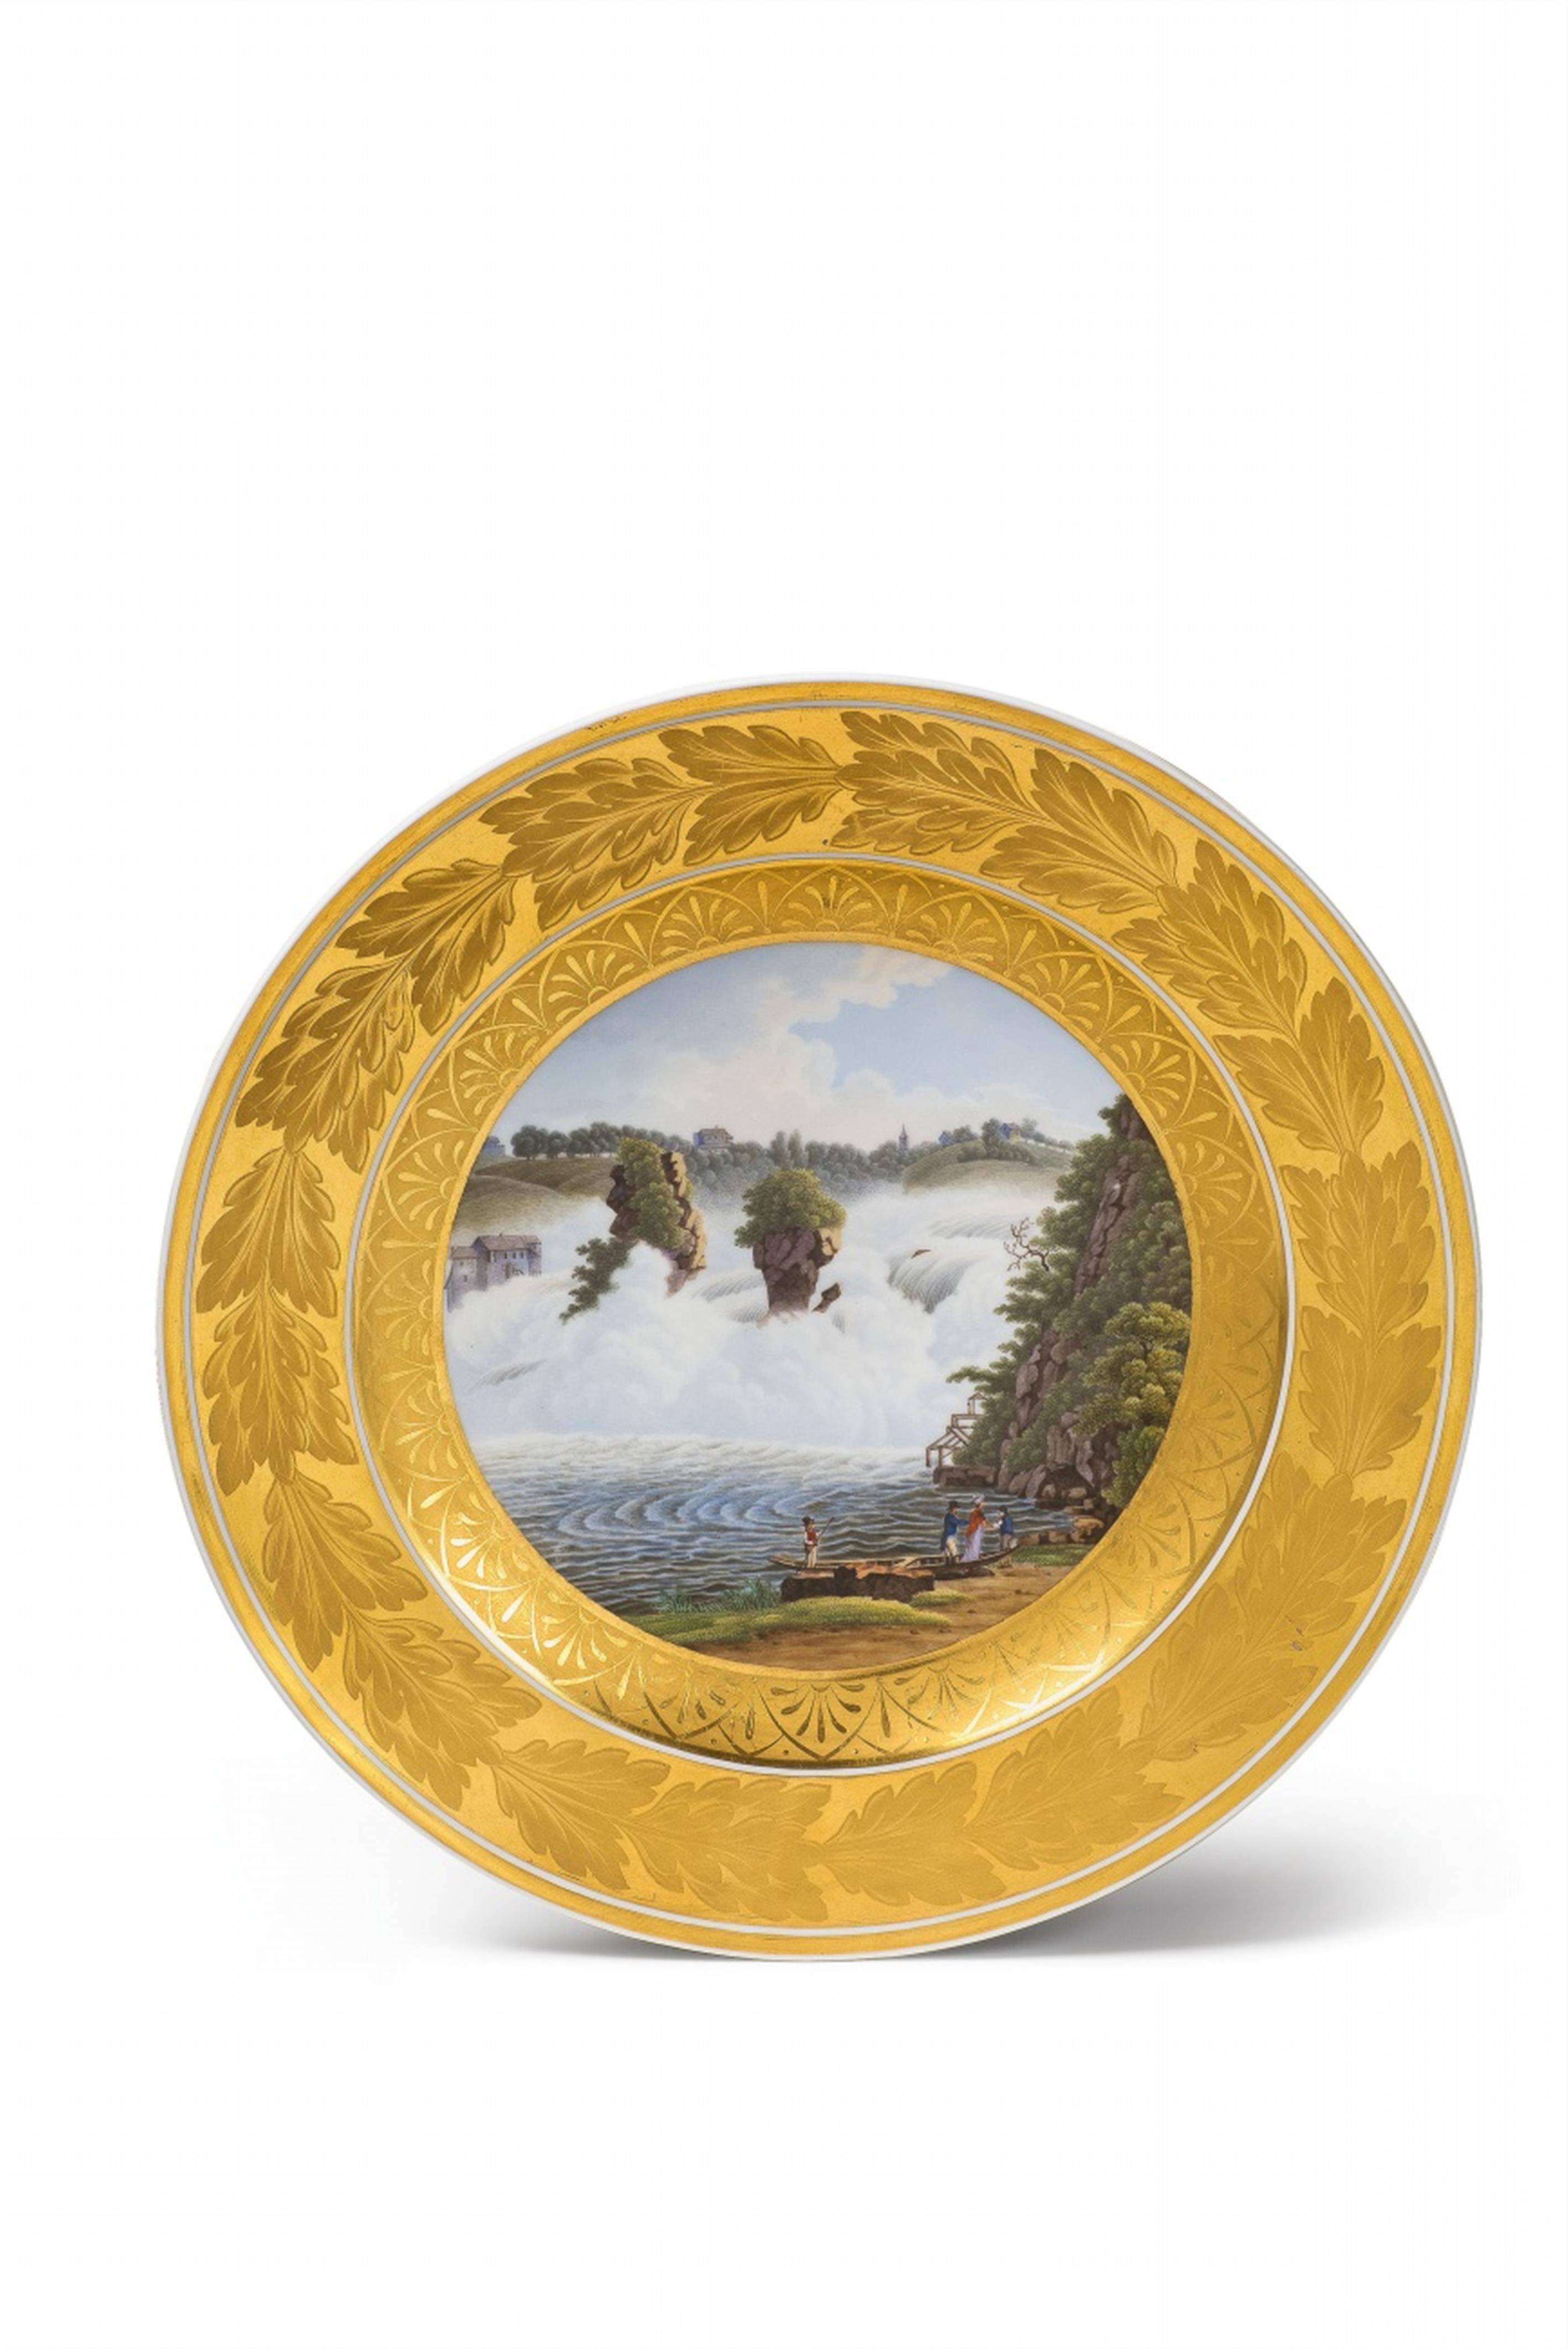 A Berlin KPM porcelain plate with a view of the waterfall at Schaffhausen - image-1